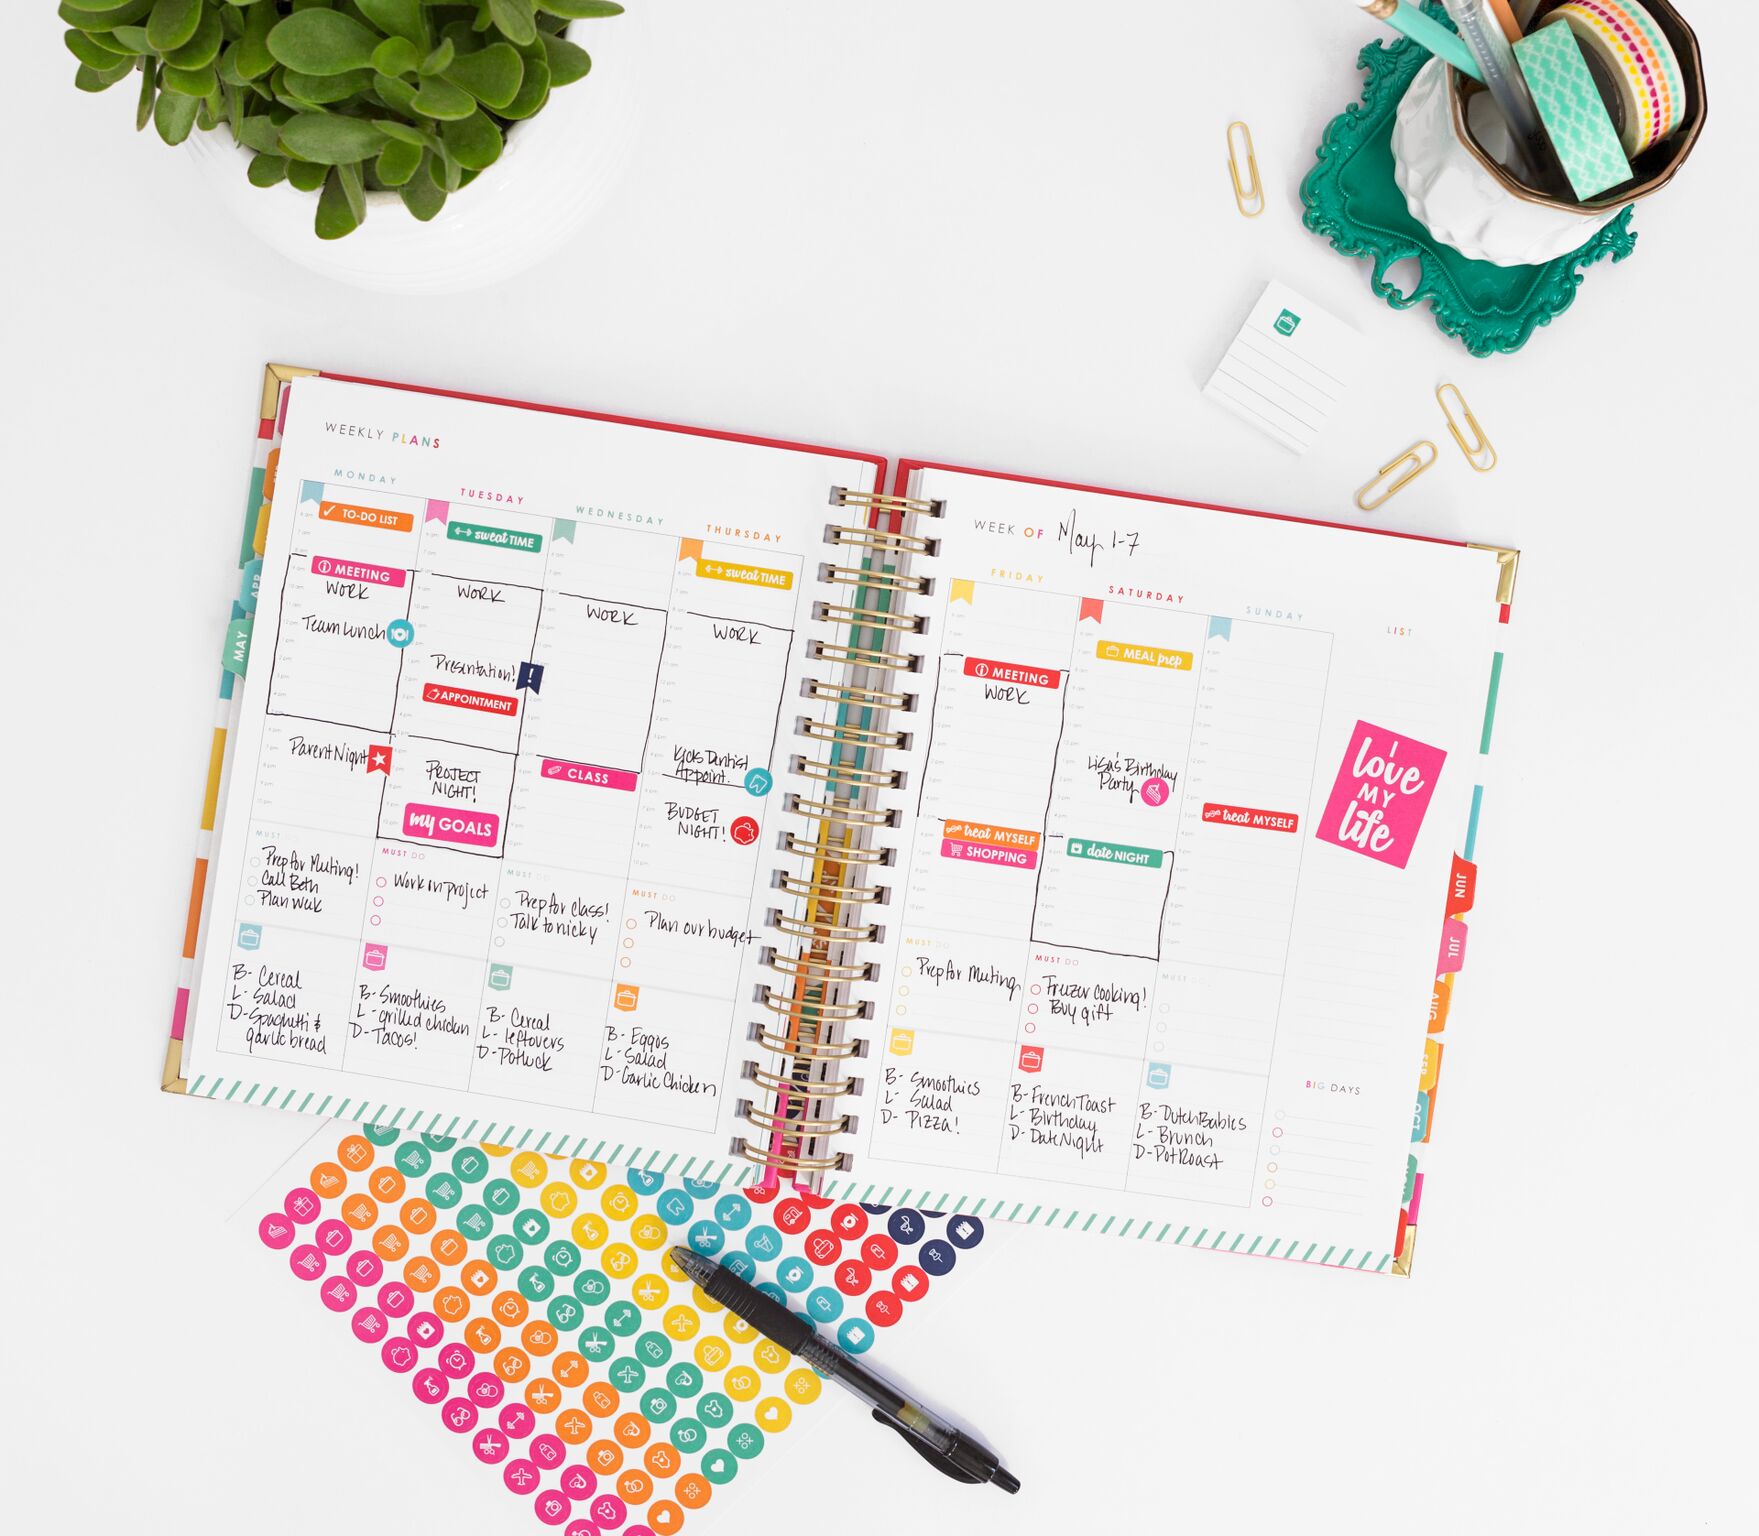 The Living Well Planner is the perfect tool to help you achieve your dream job